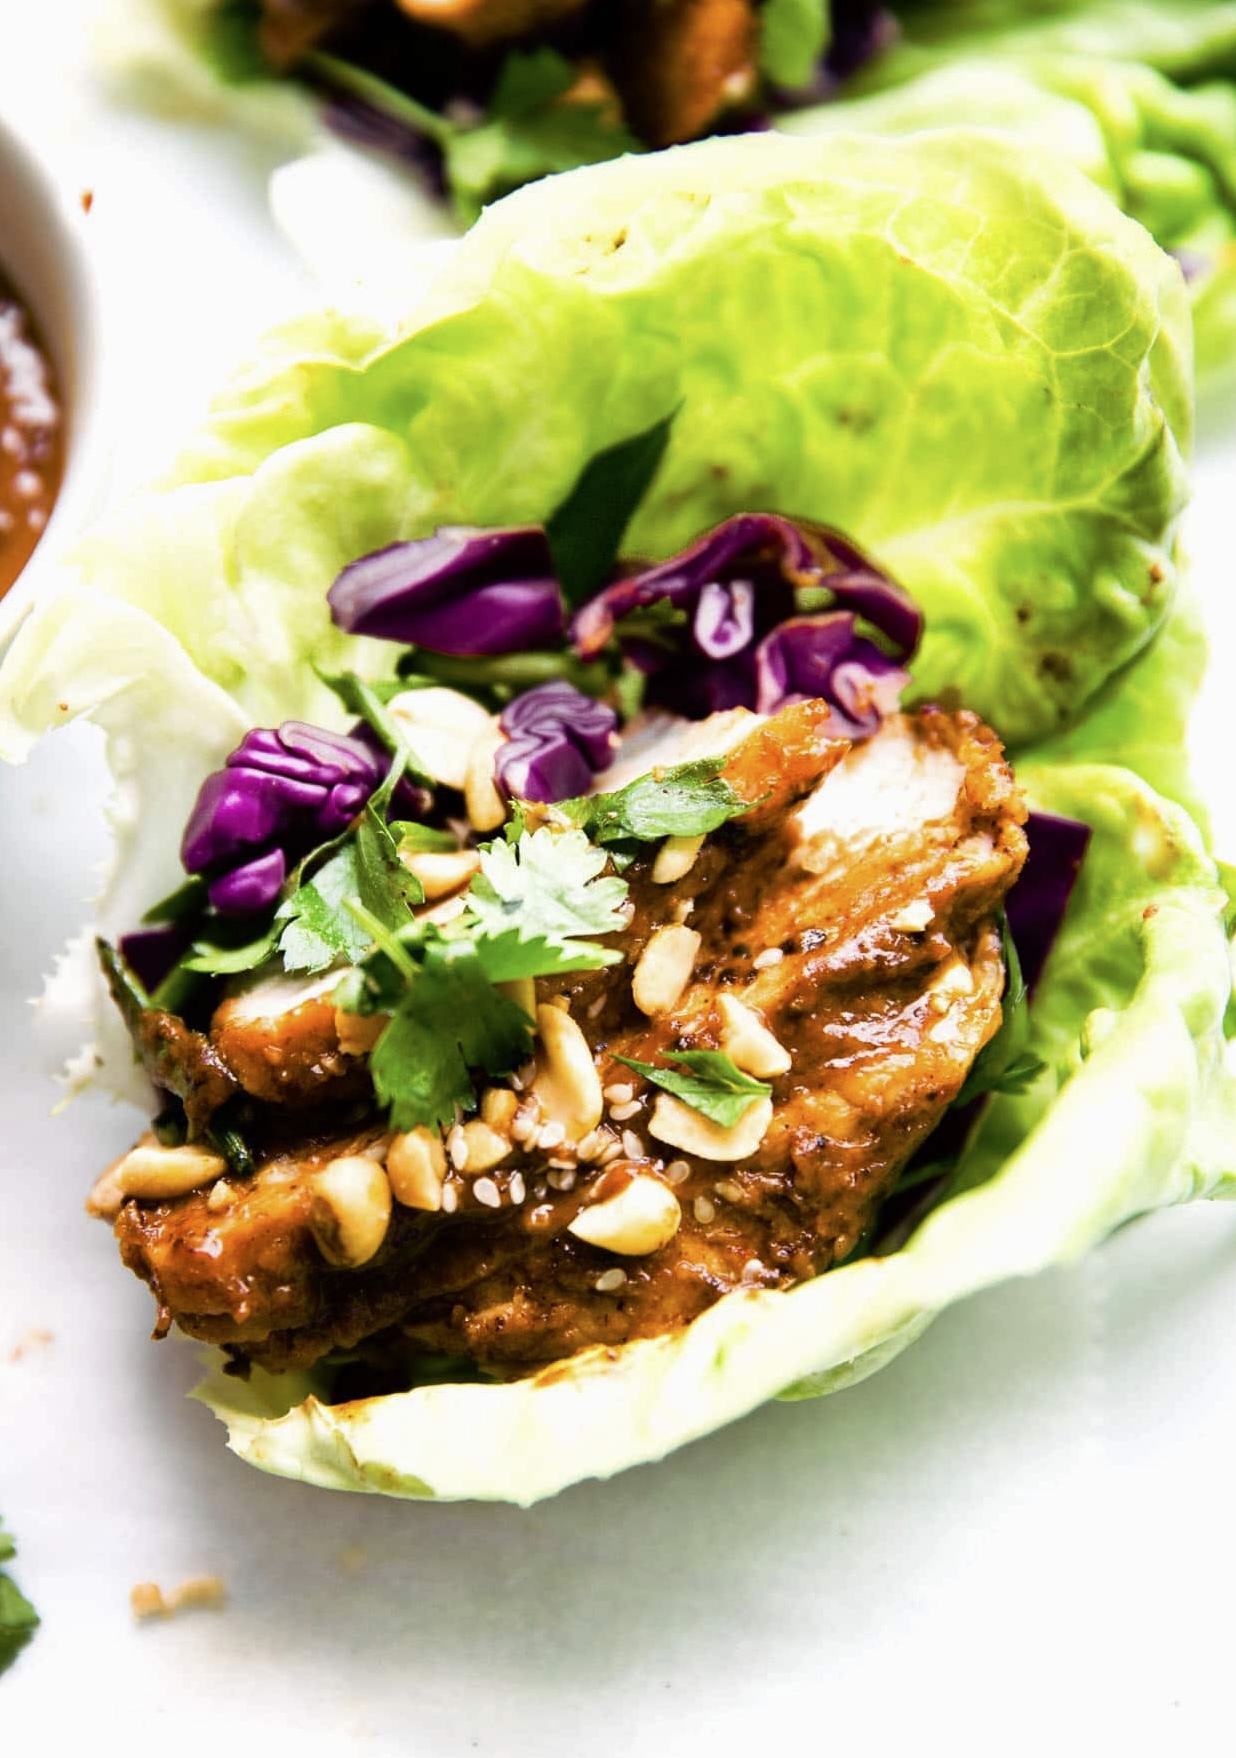 A lettuce wrap filled with Asian BBQ pork.